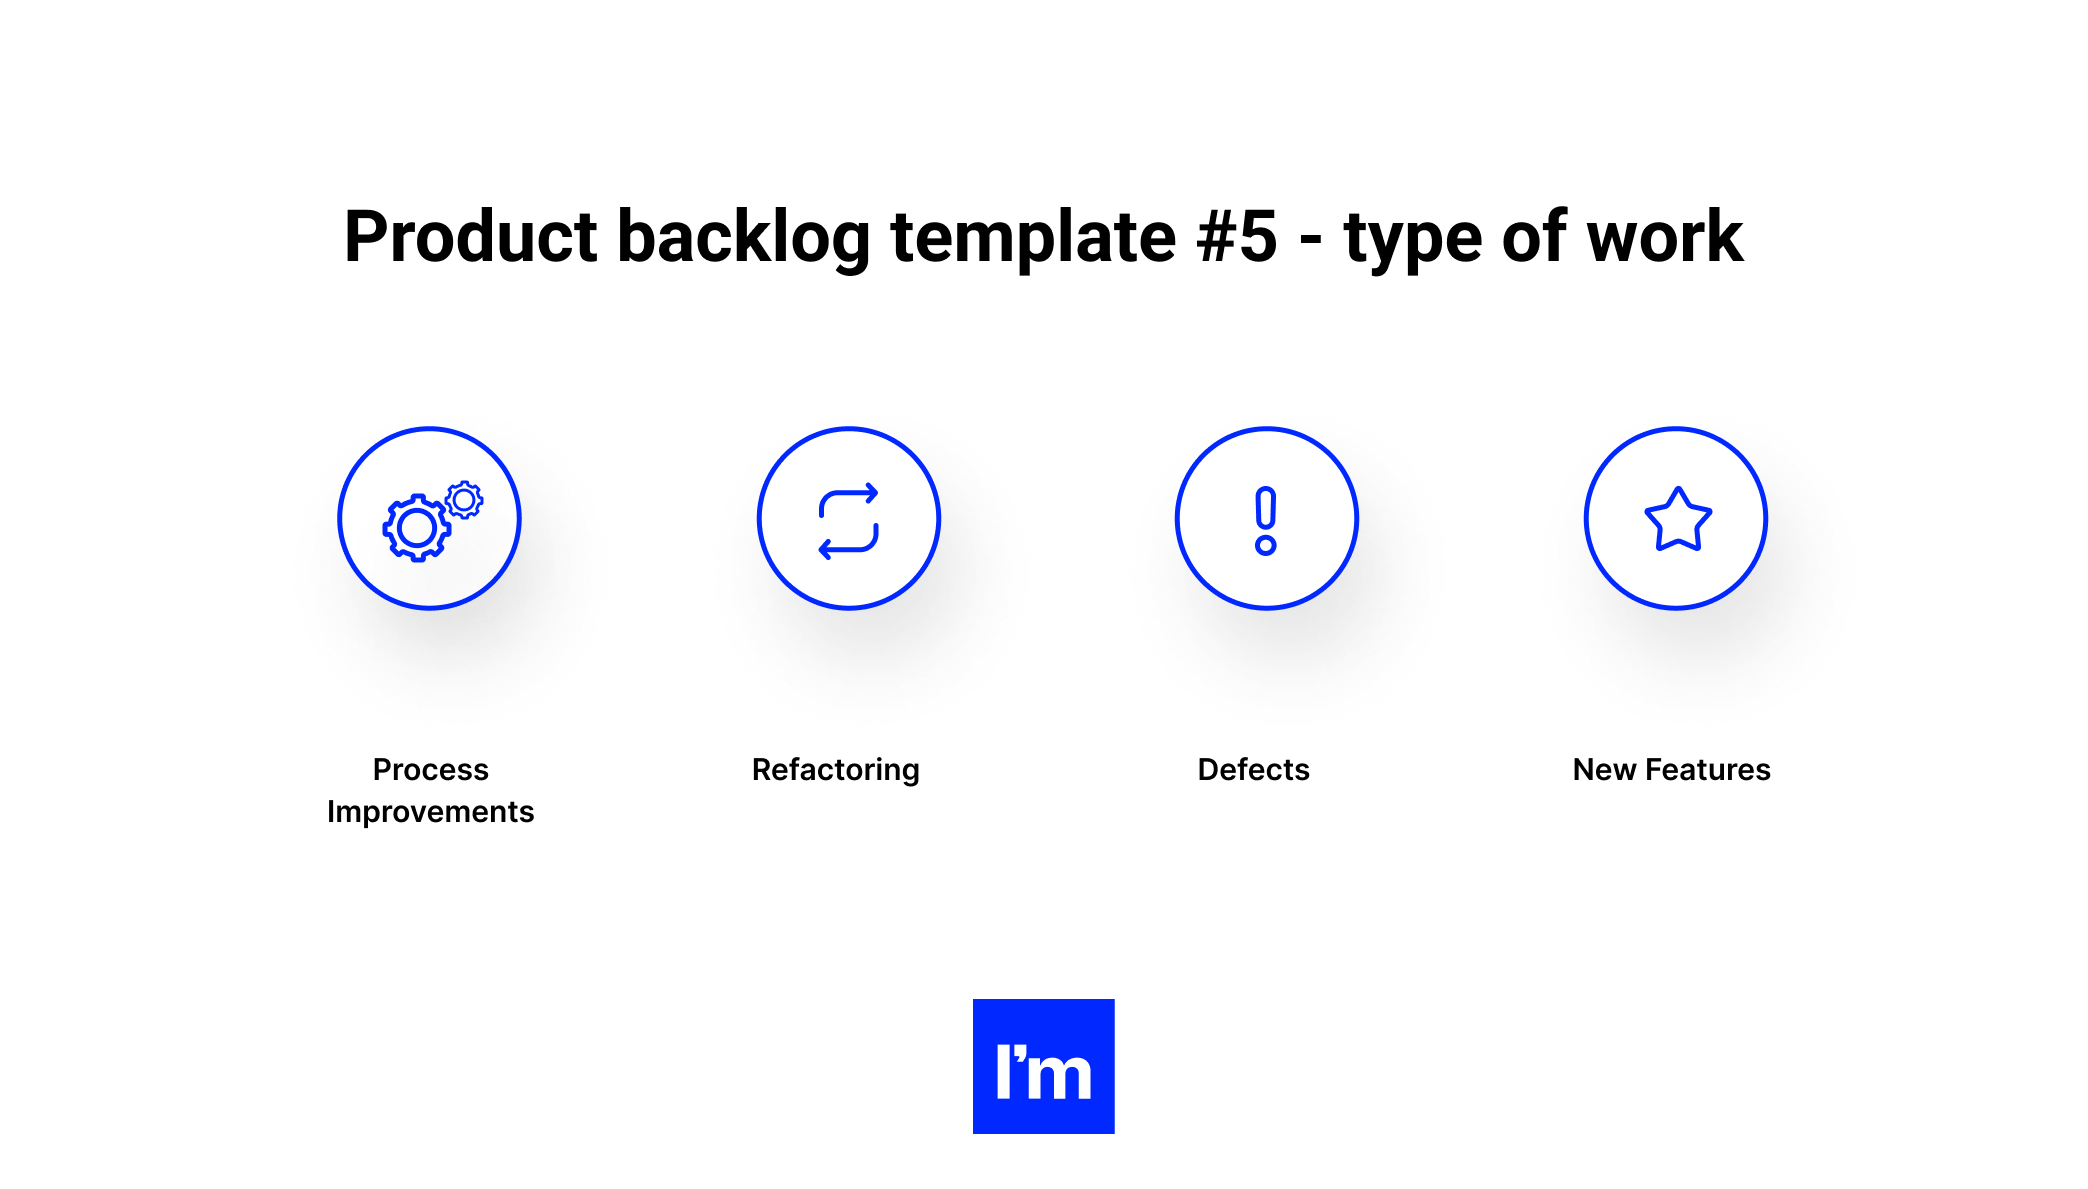 Product backlog template #5 - type of work